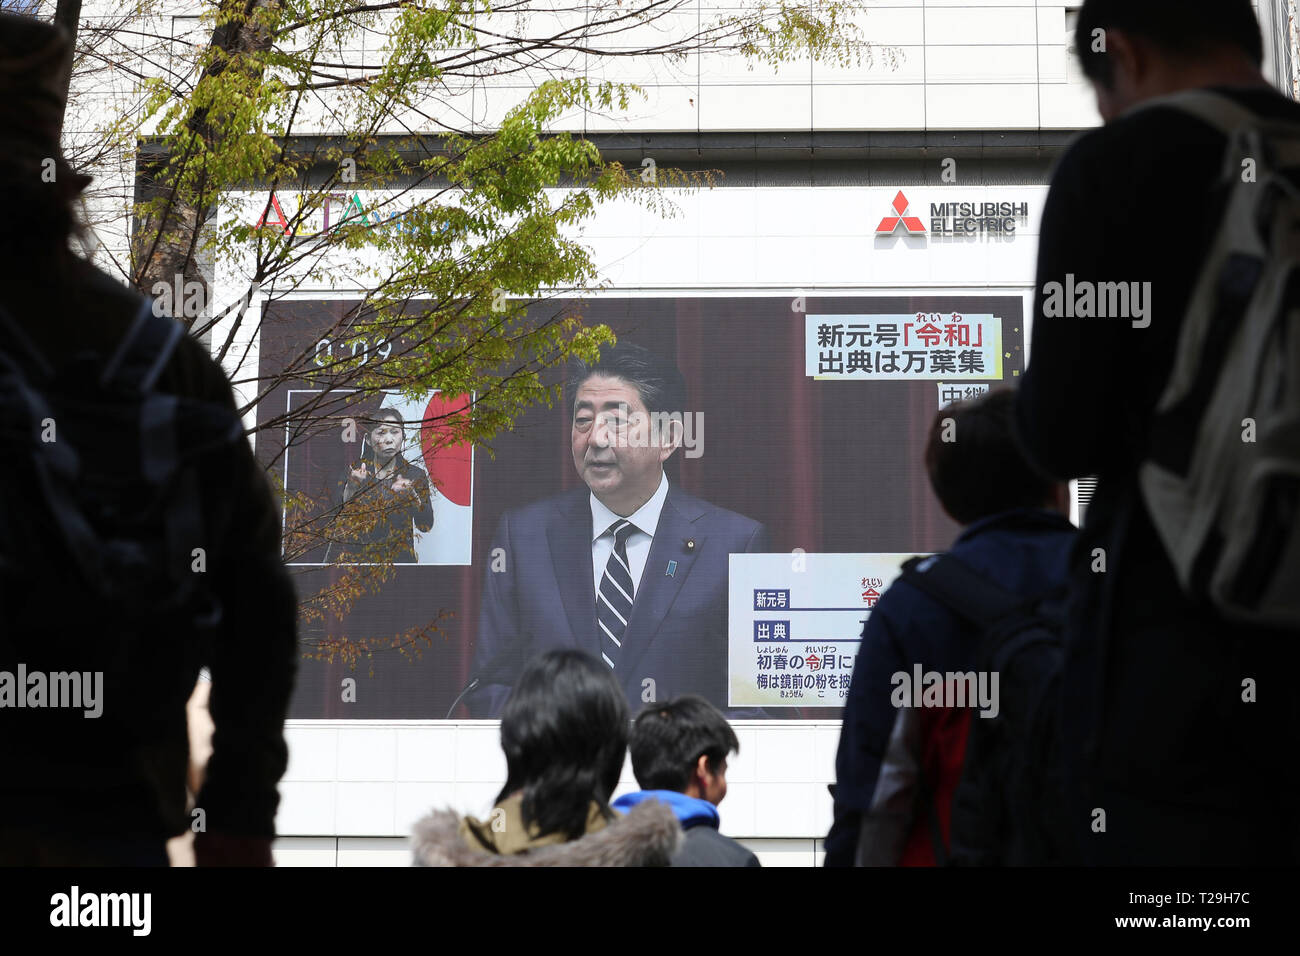 Tokyo, Japan. 1st Apr, 2019. People watch a large screen showing Japanese Prime Minister Shinzo Abe's announcement about the name of the new Imperial era, 'Reiwa,' in Tokyo, Japan on April 1, 2019. The Japanese government officially announced the country's next era will be known as the 'Reiwa' era on Monday, a month before Crown Prince Naruhito ascends the throne following Emperor Akihito's abdication. Credit: Yohei Osada/AFLO/Alamy Live News Stock Photo